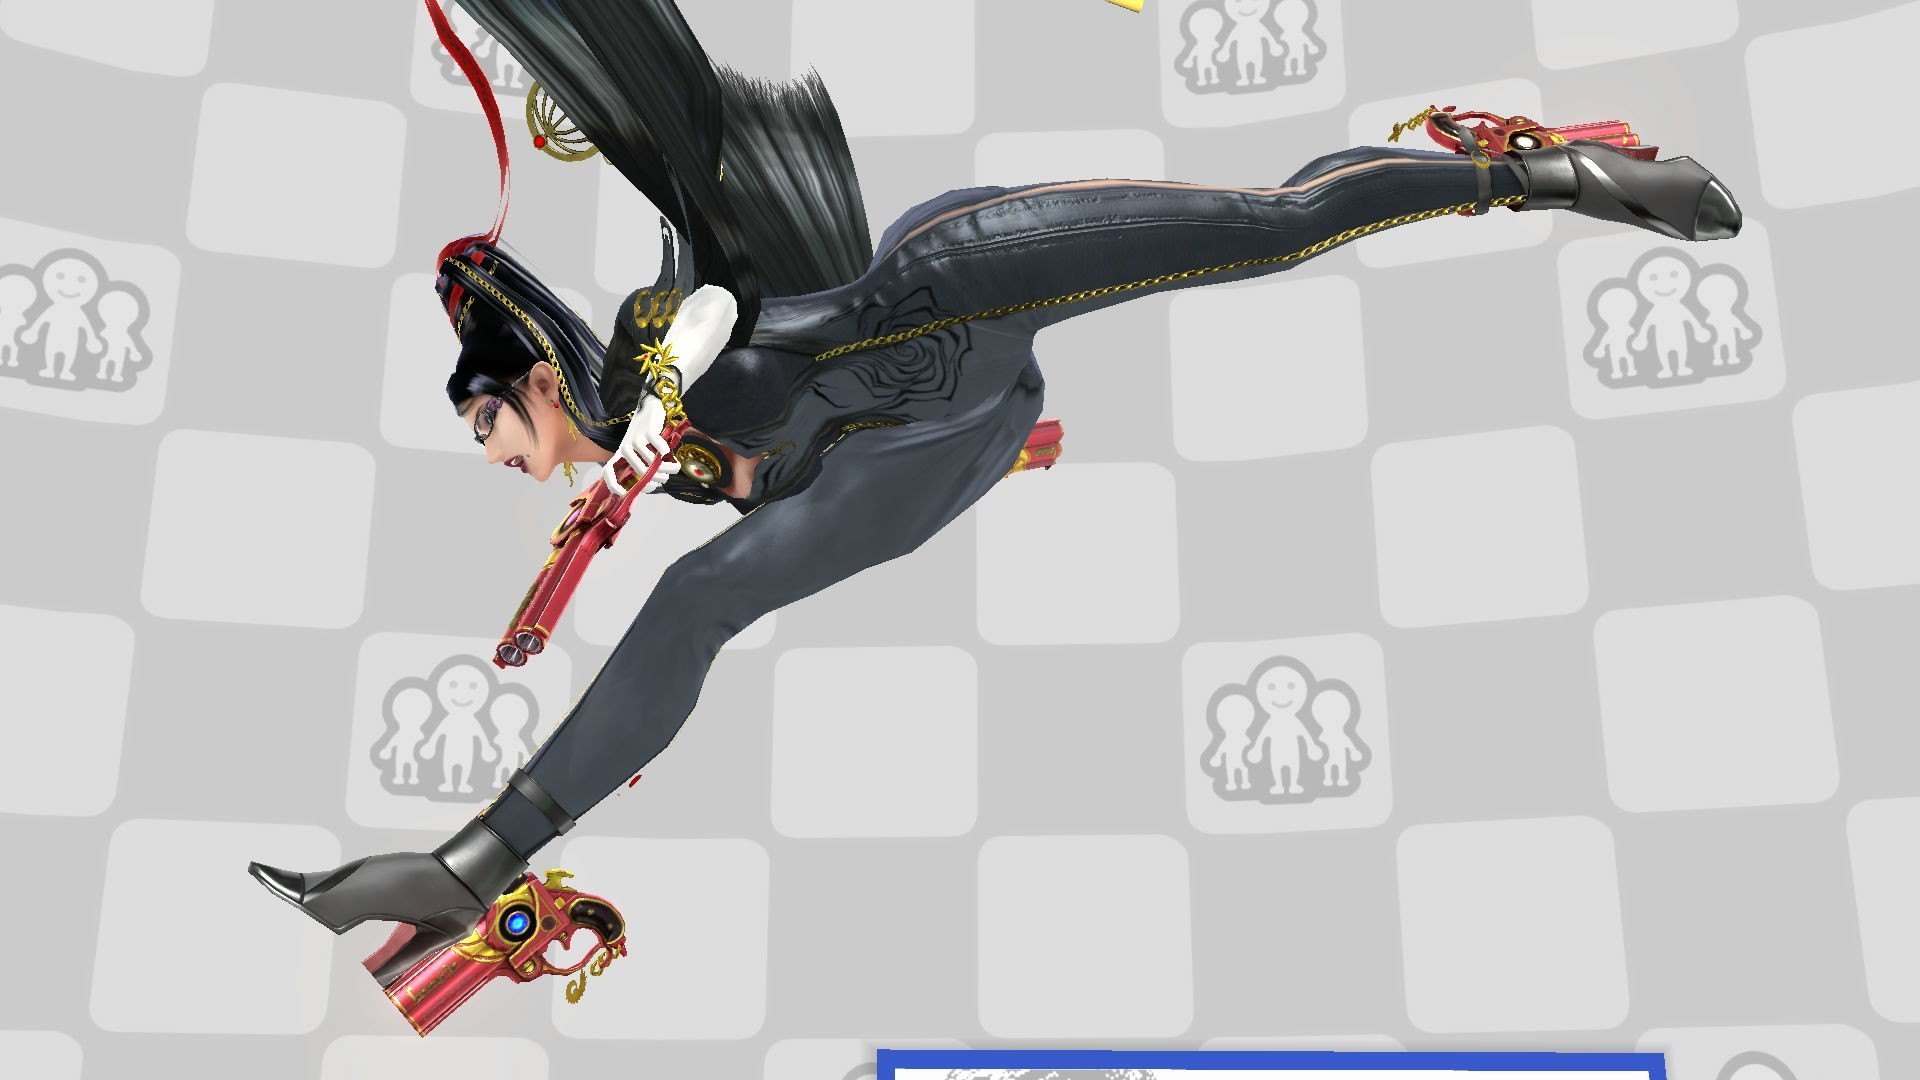 Daily Bayonetta — thicc mods are coming